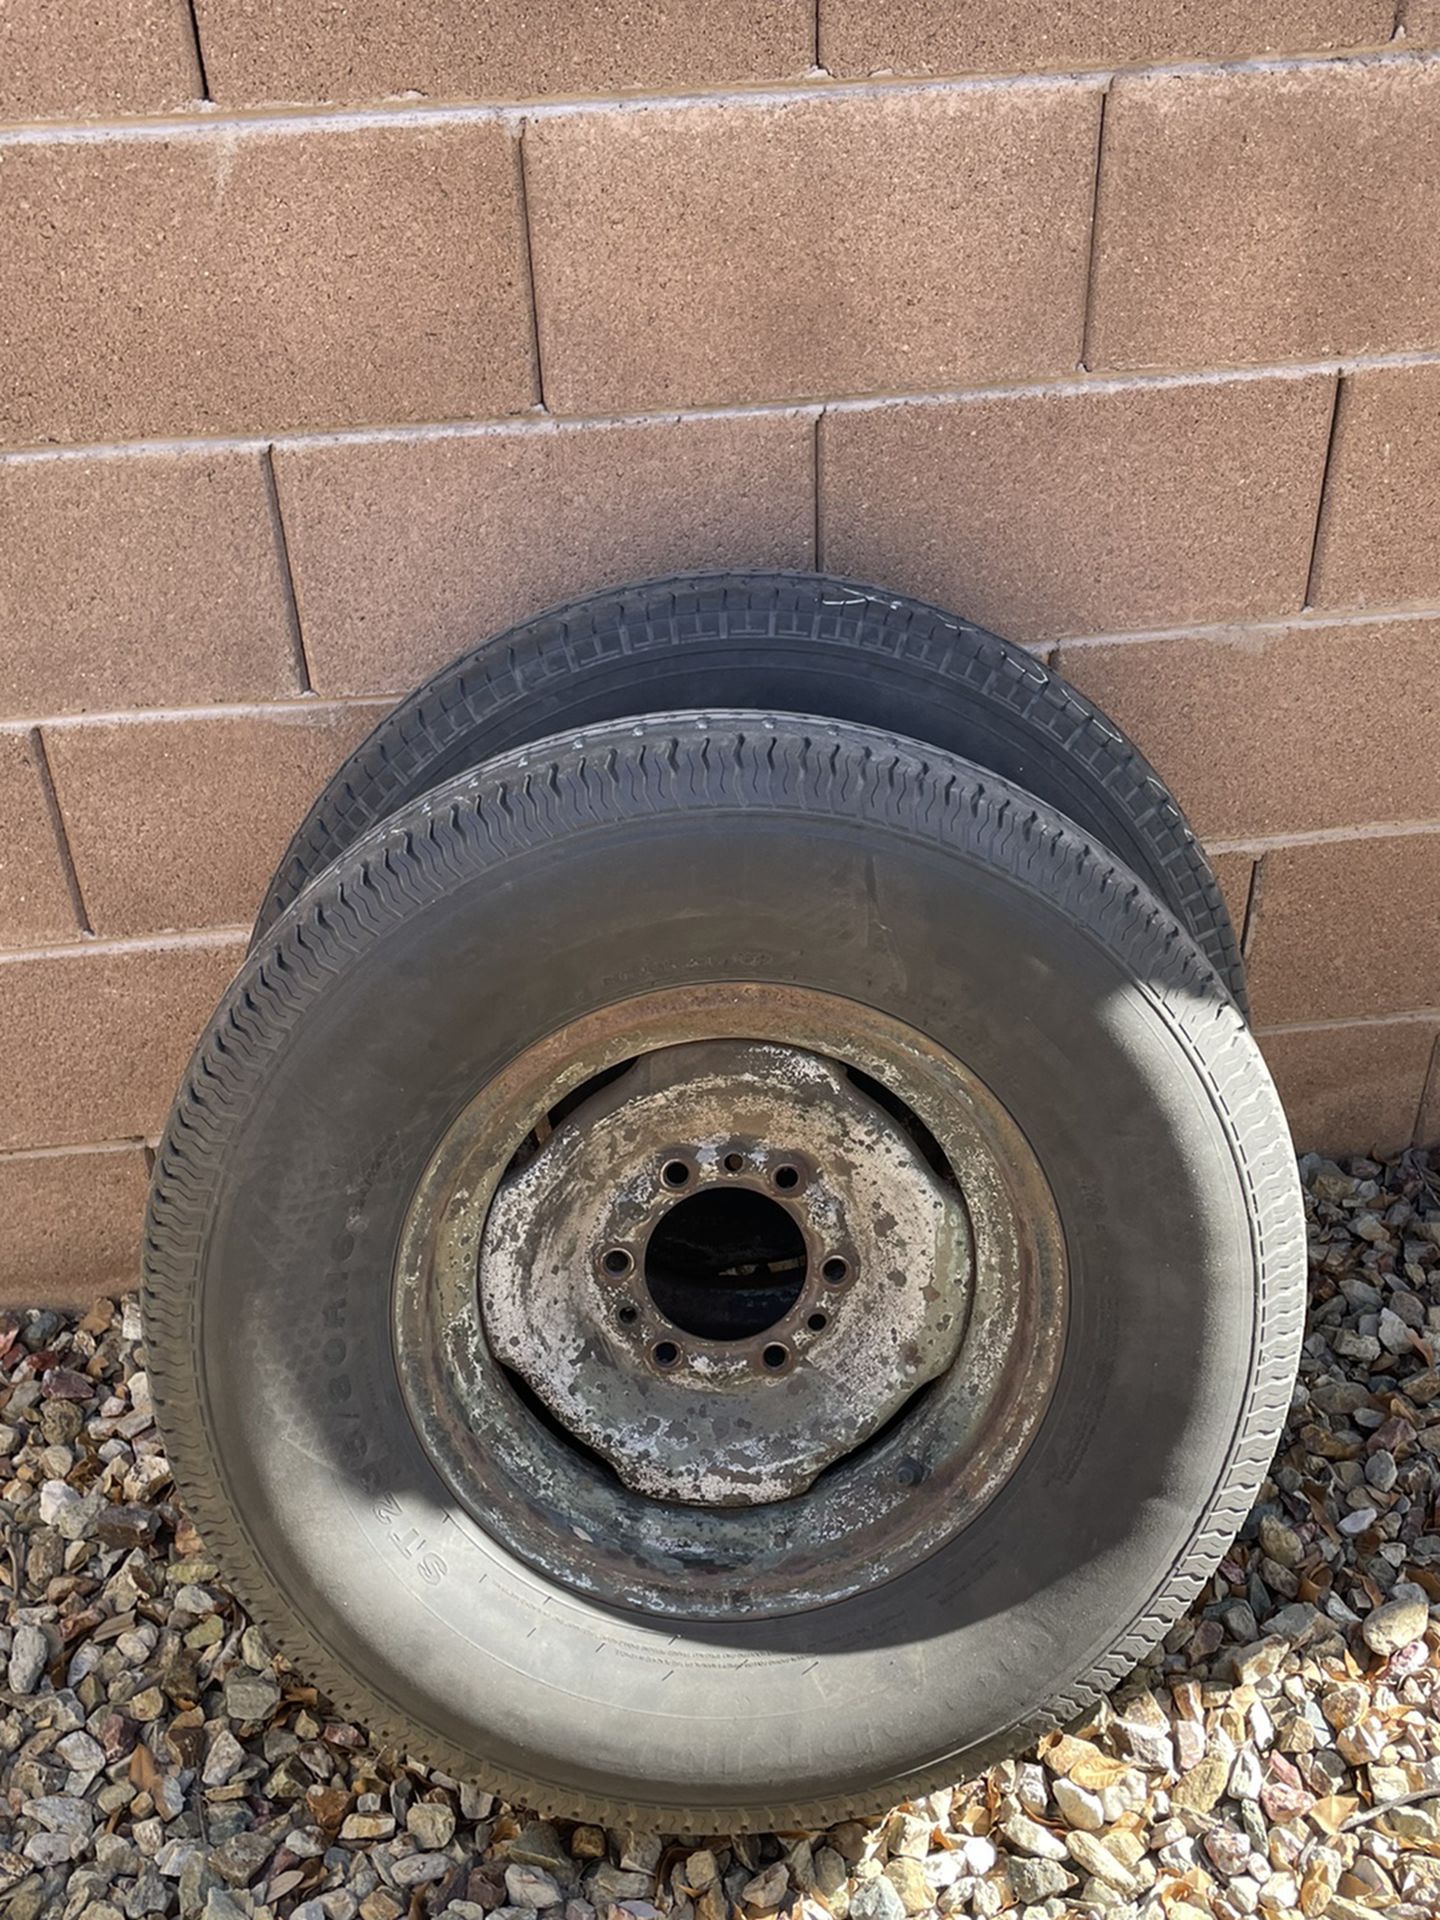 Trailer Wheels And Tires